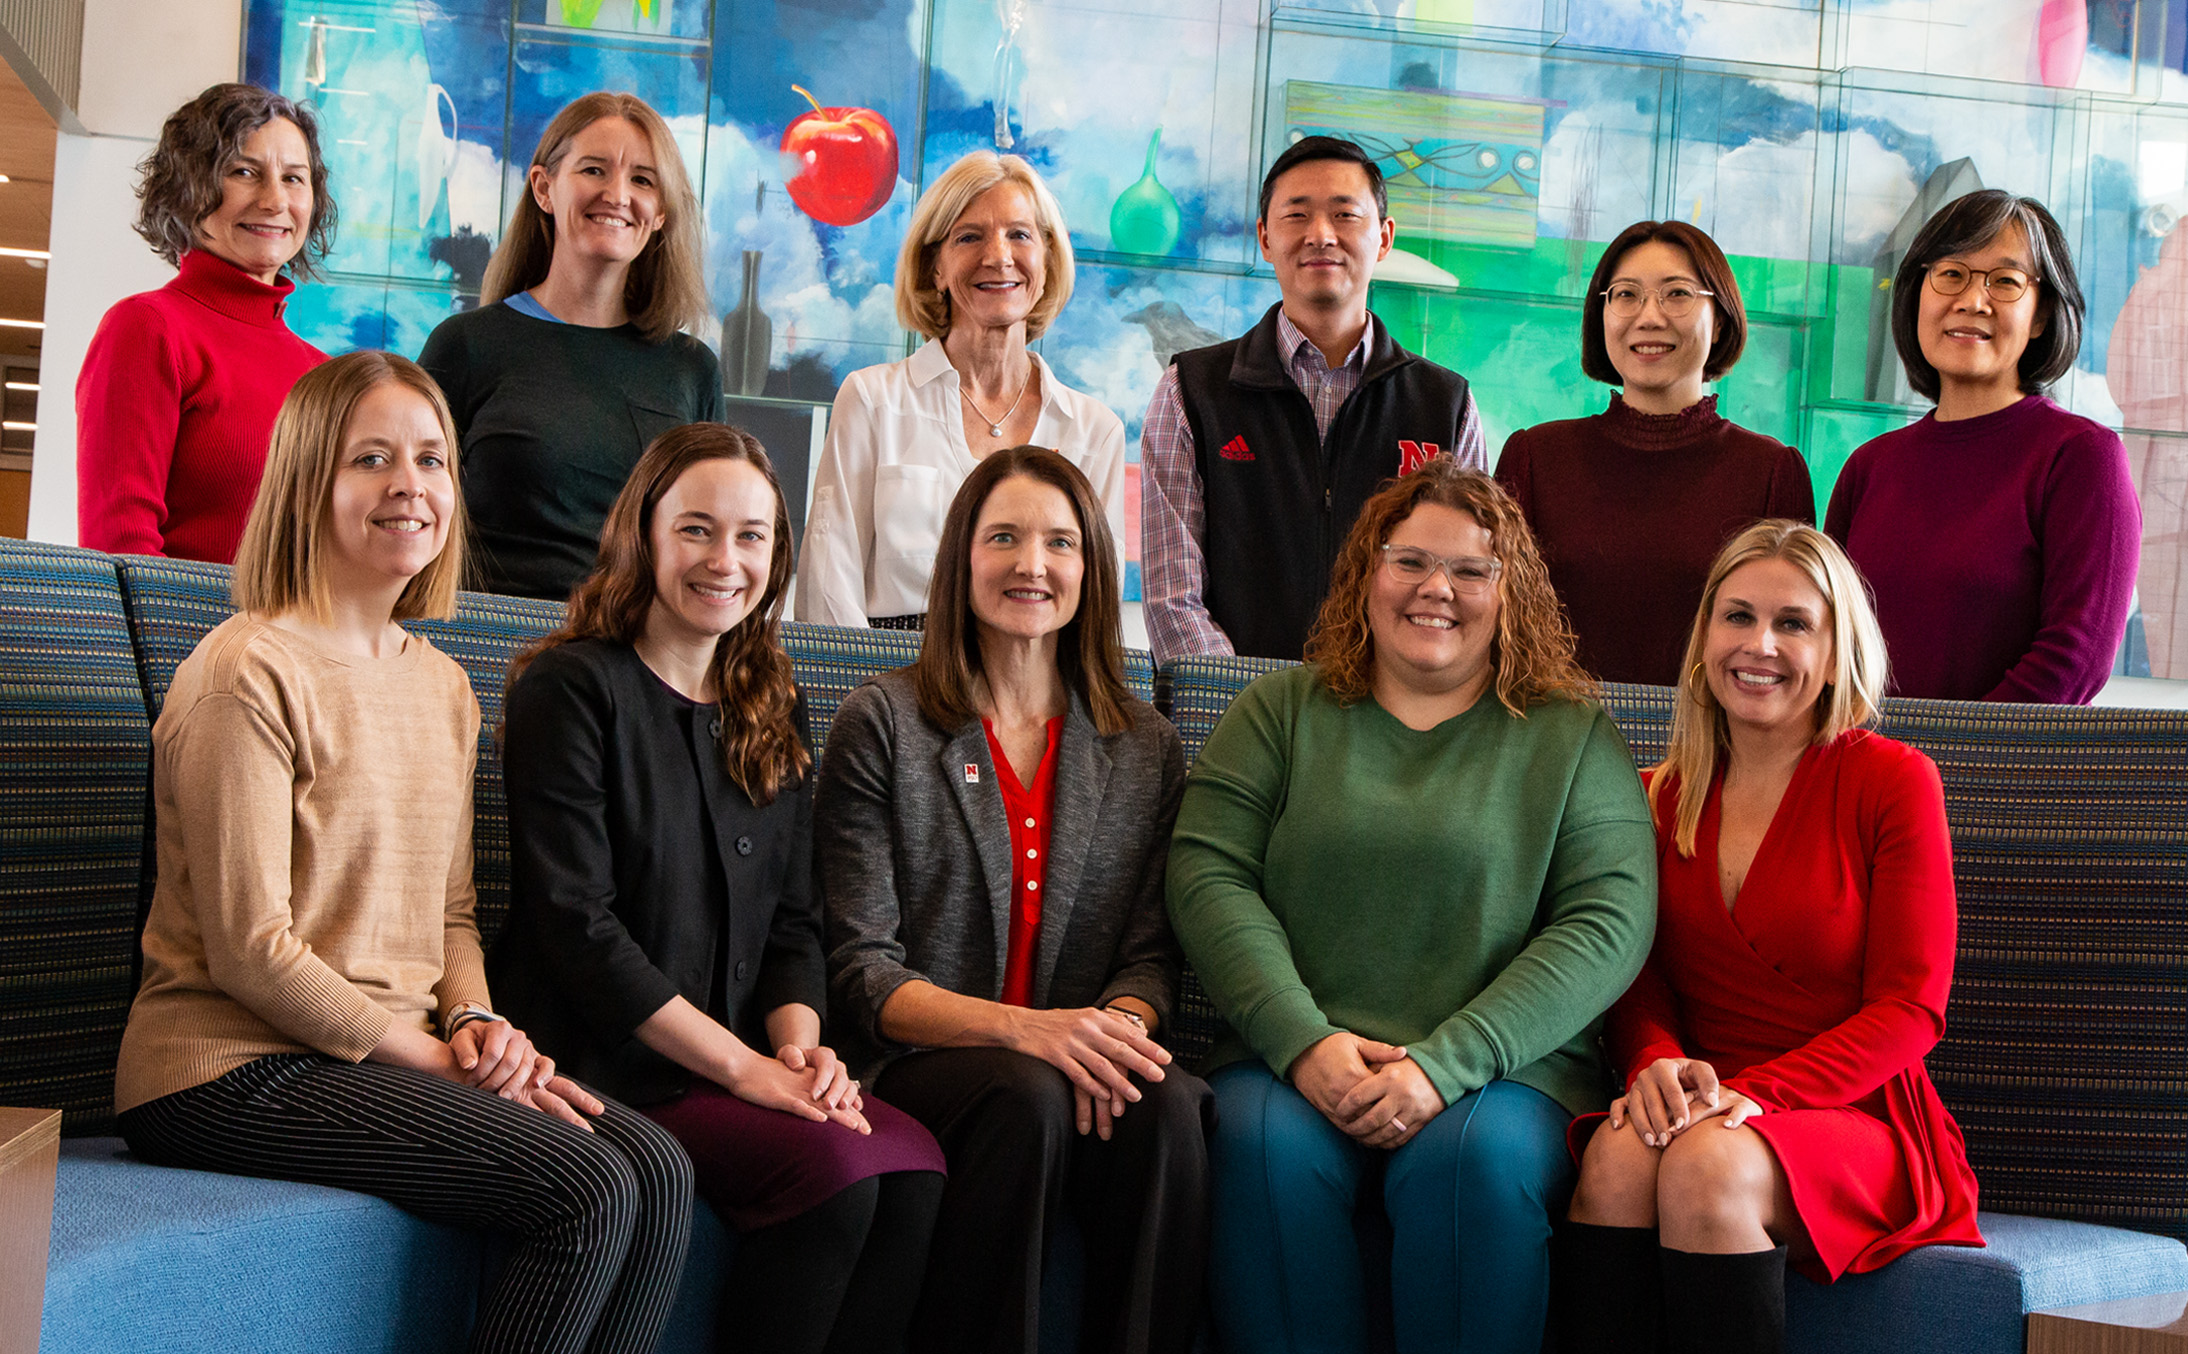 Project team members include, front row from left: Natalie Koziol, Jenna Finch, Lisa Knoche, Jennifer Leeper Miller and Holly Hatton-Bowers. Back row, from left: Julia Torquati, Carrie Clark, Sue Sheridan, Changmin Yan, HyeonJin Yoon and Soo-Young Hong. (Kyleigh Skaggs, CYFS)